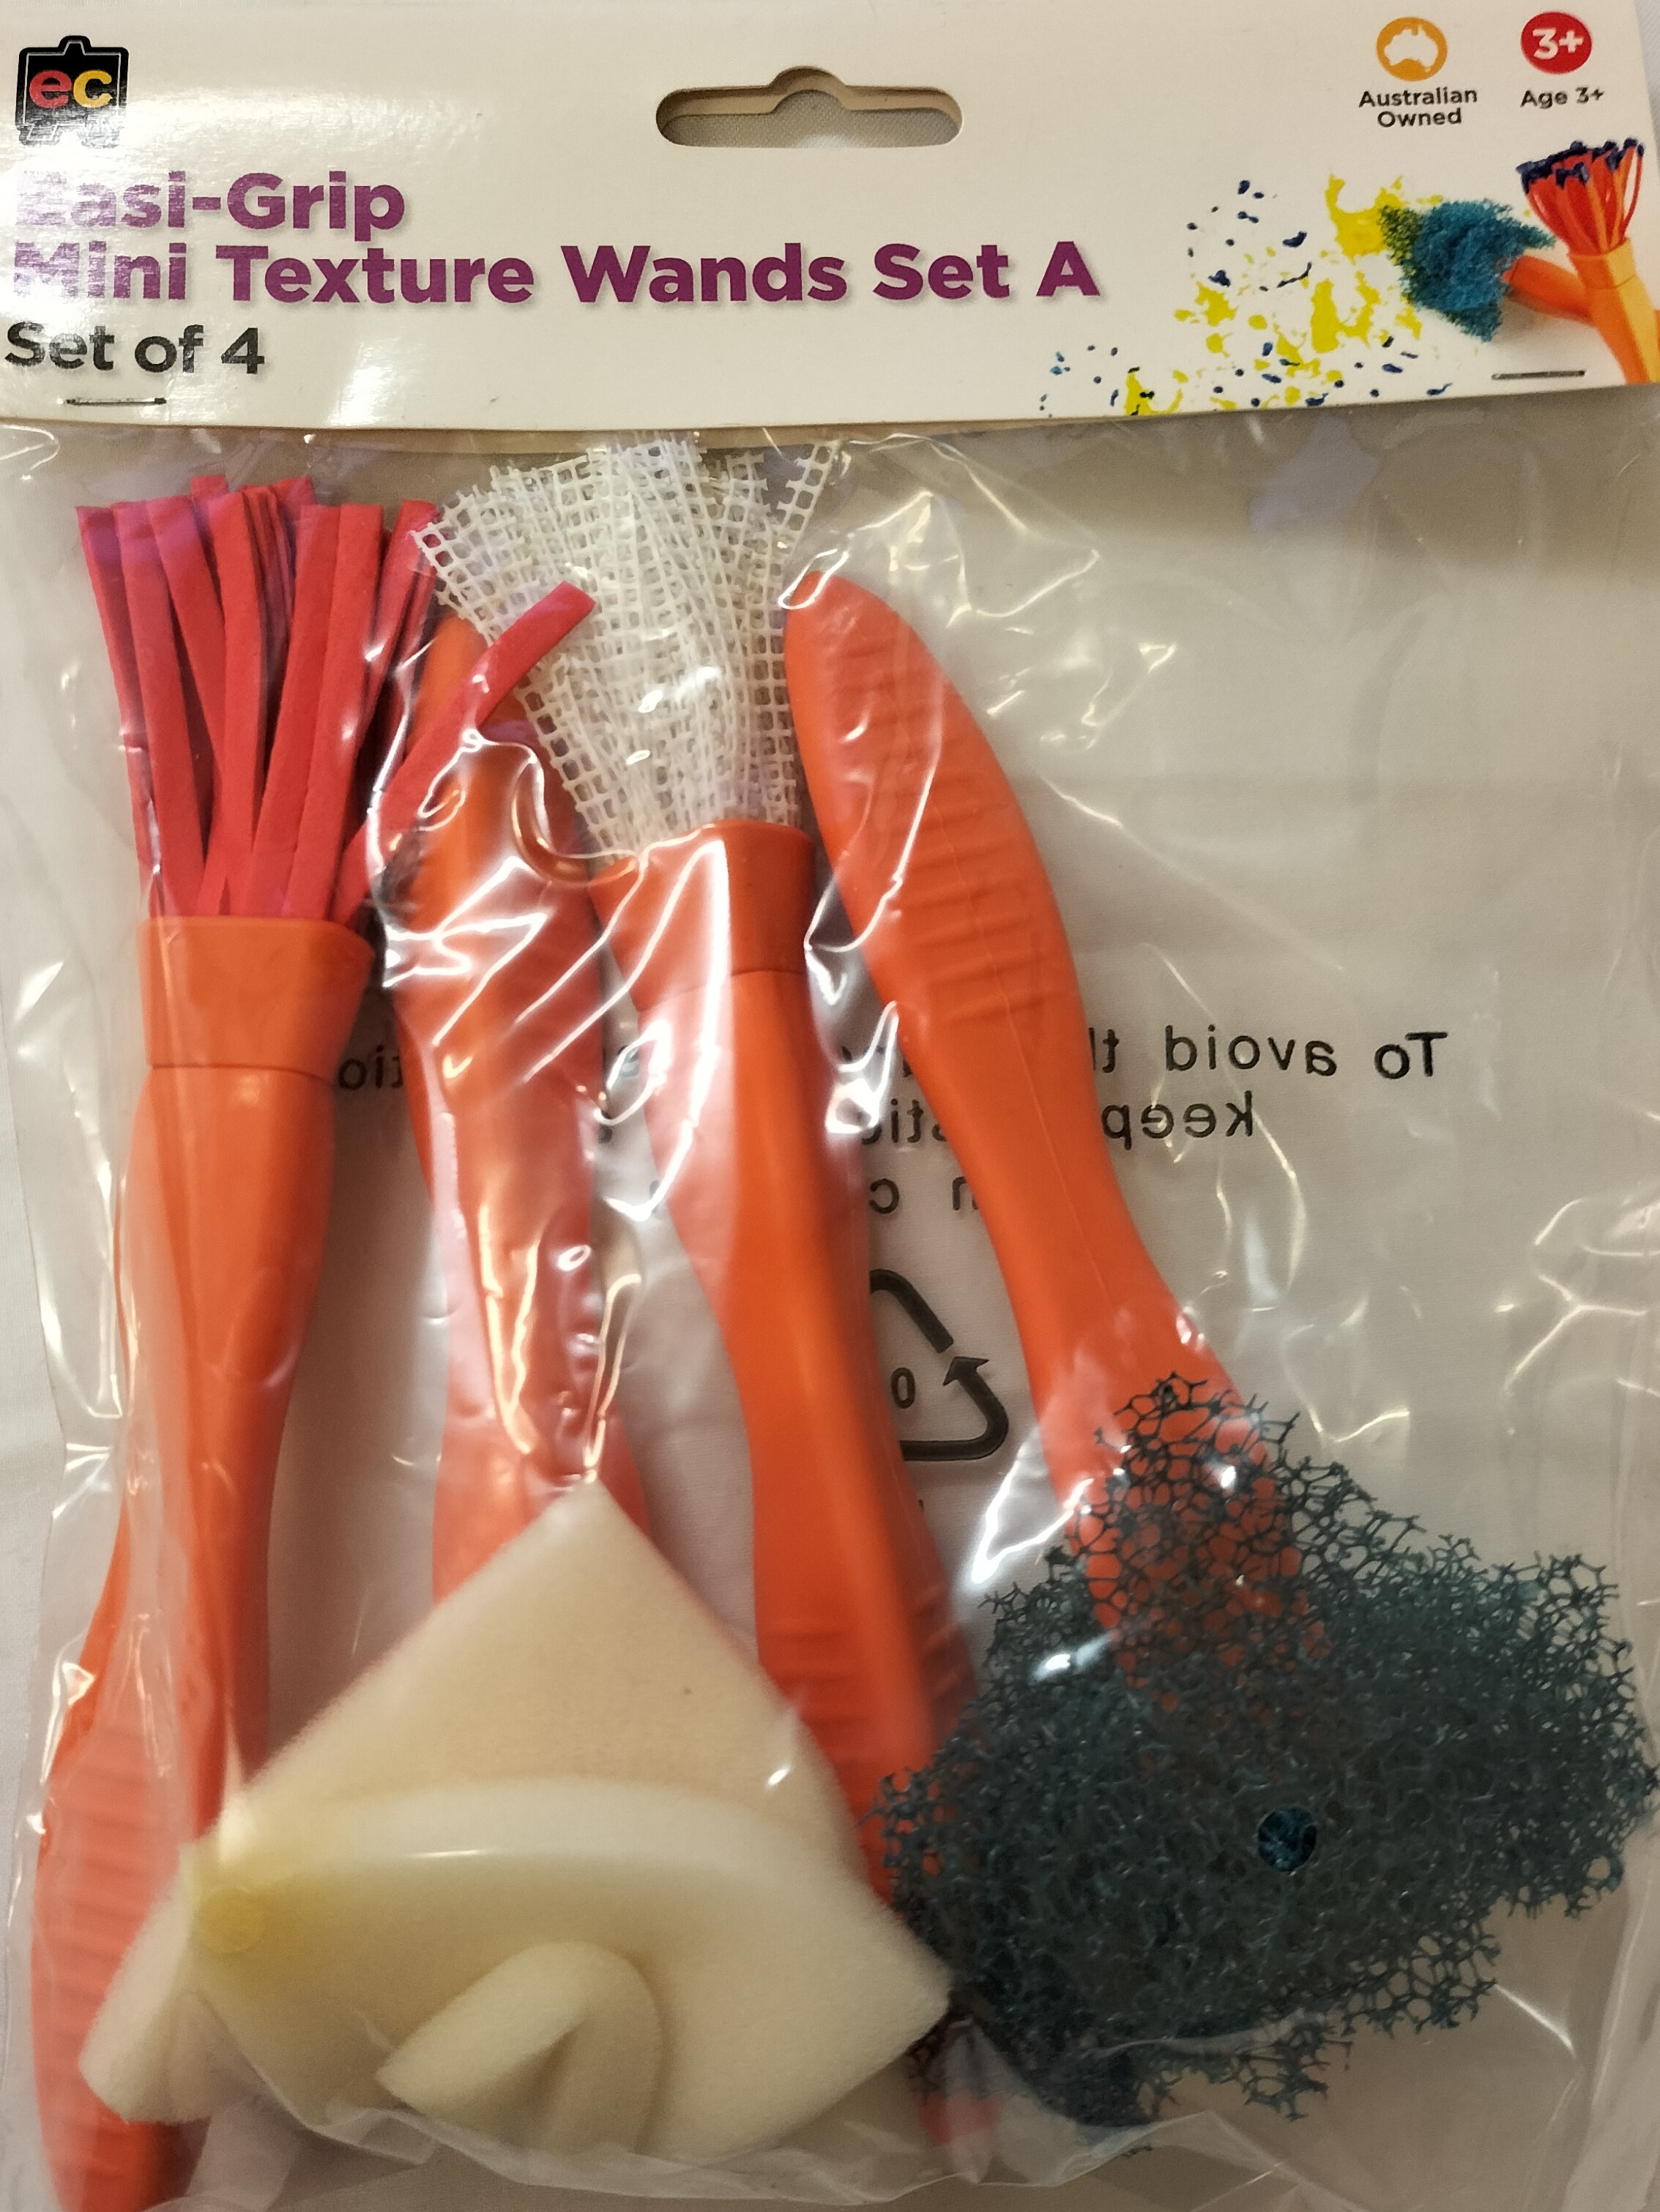 Texture Wands Easi-Grip Mini Pack of 4 (Set A)